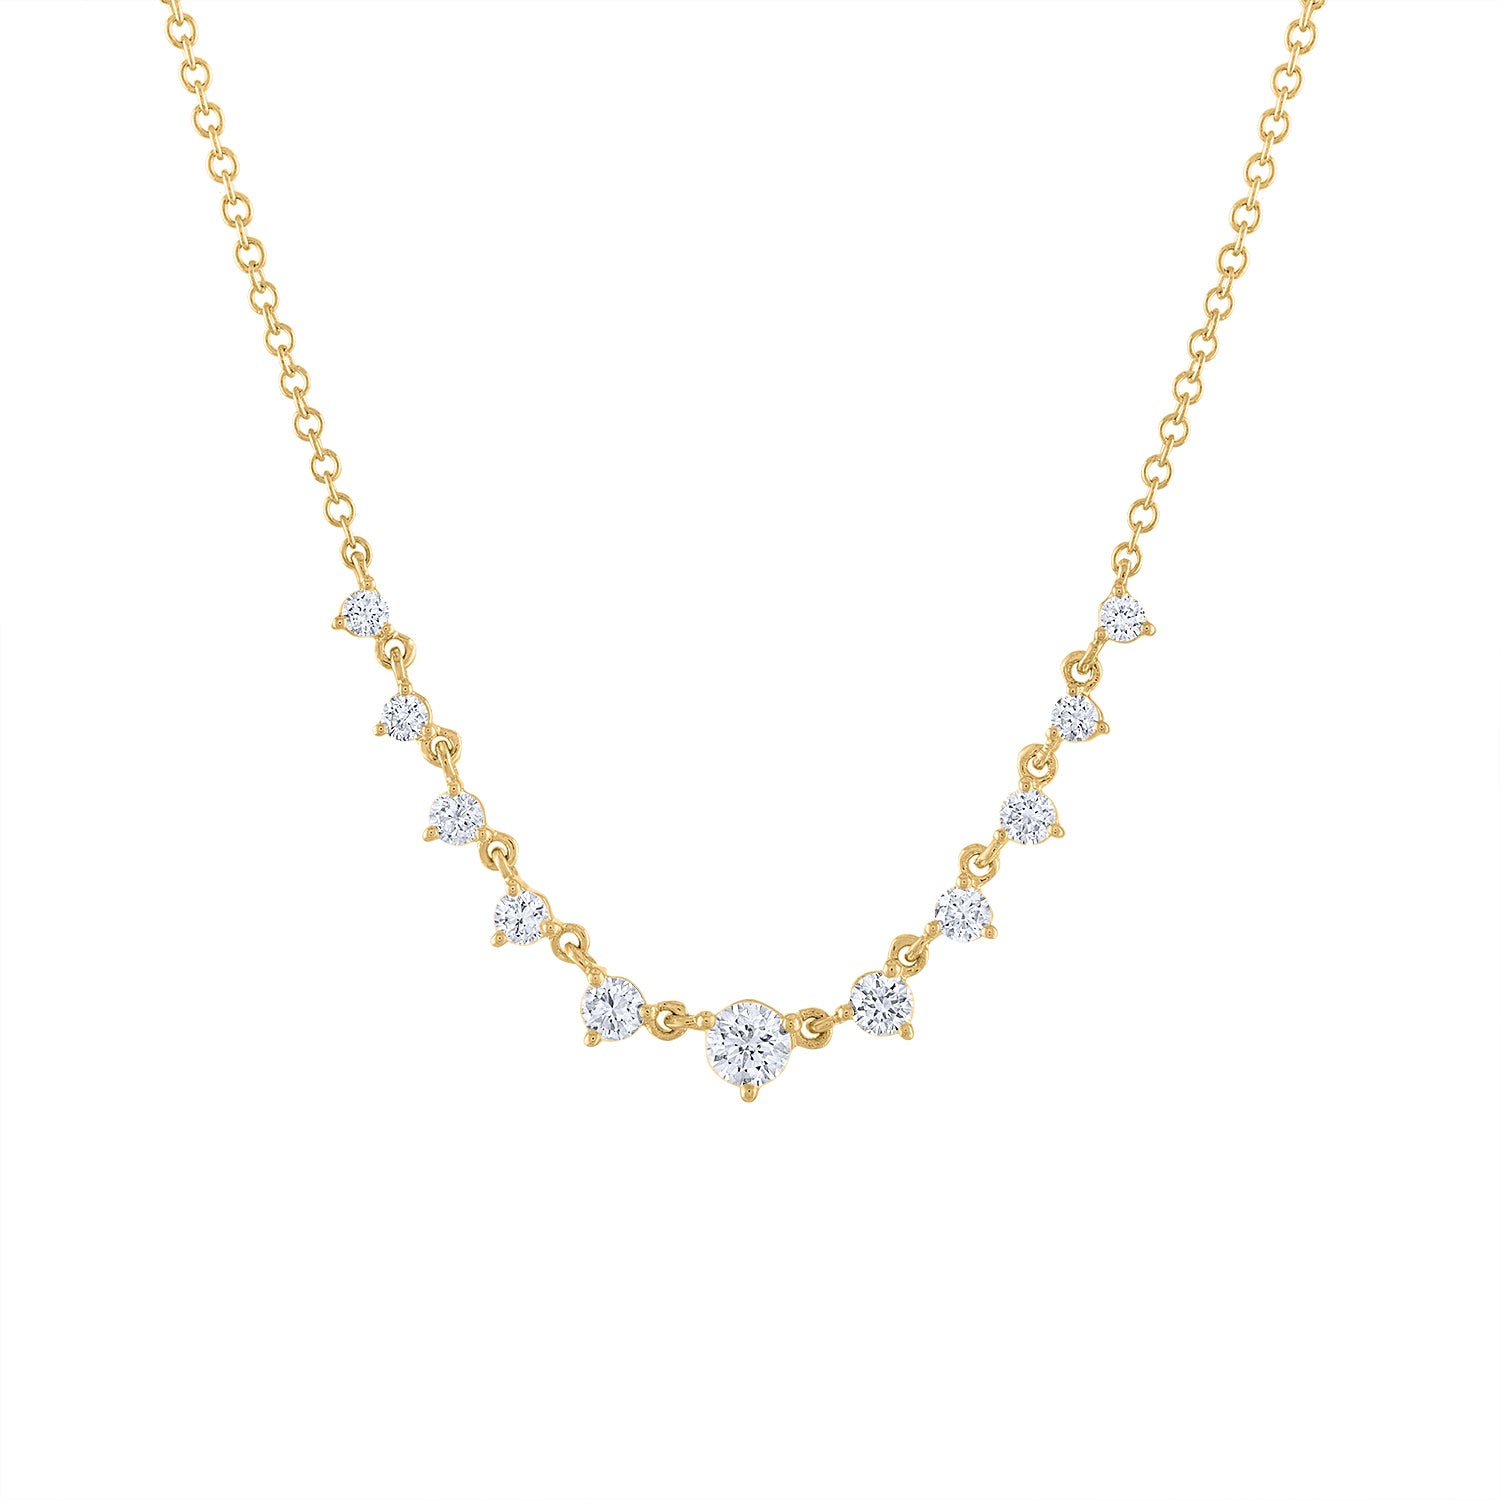 14KT GOLD ELEVEN PRONG DIAMOND STONE NECKLACE